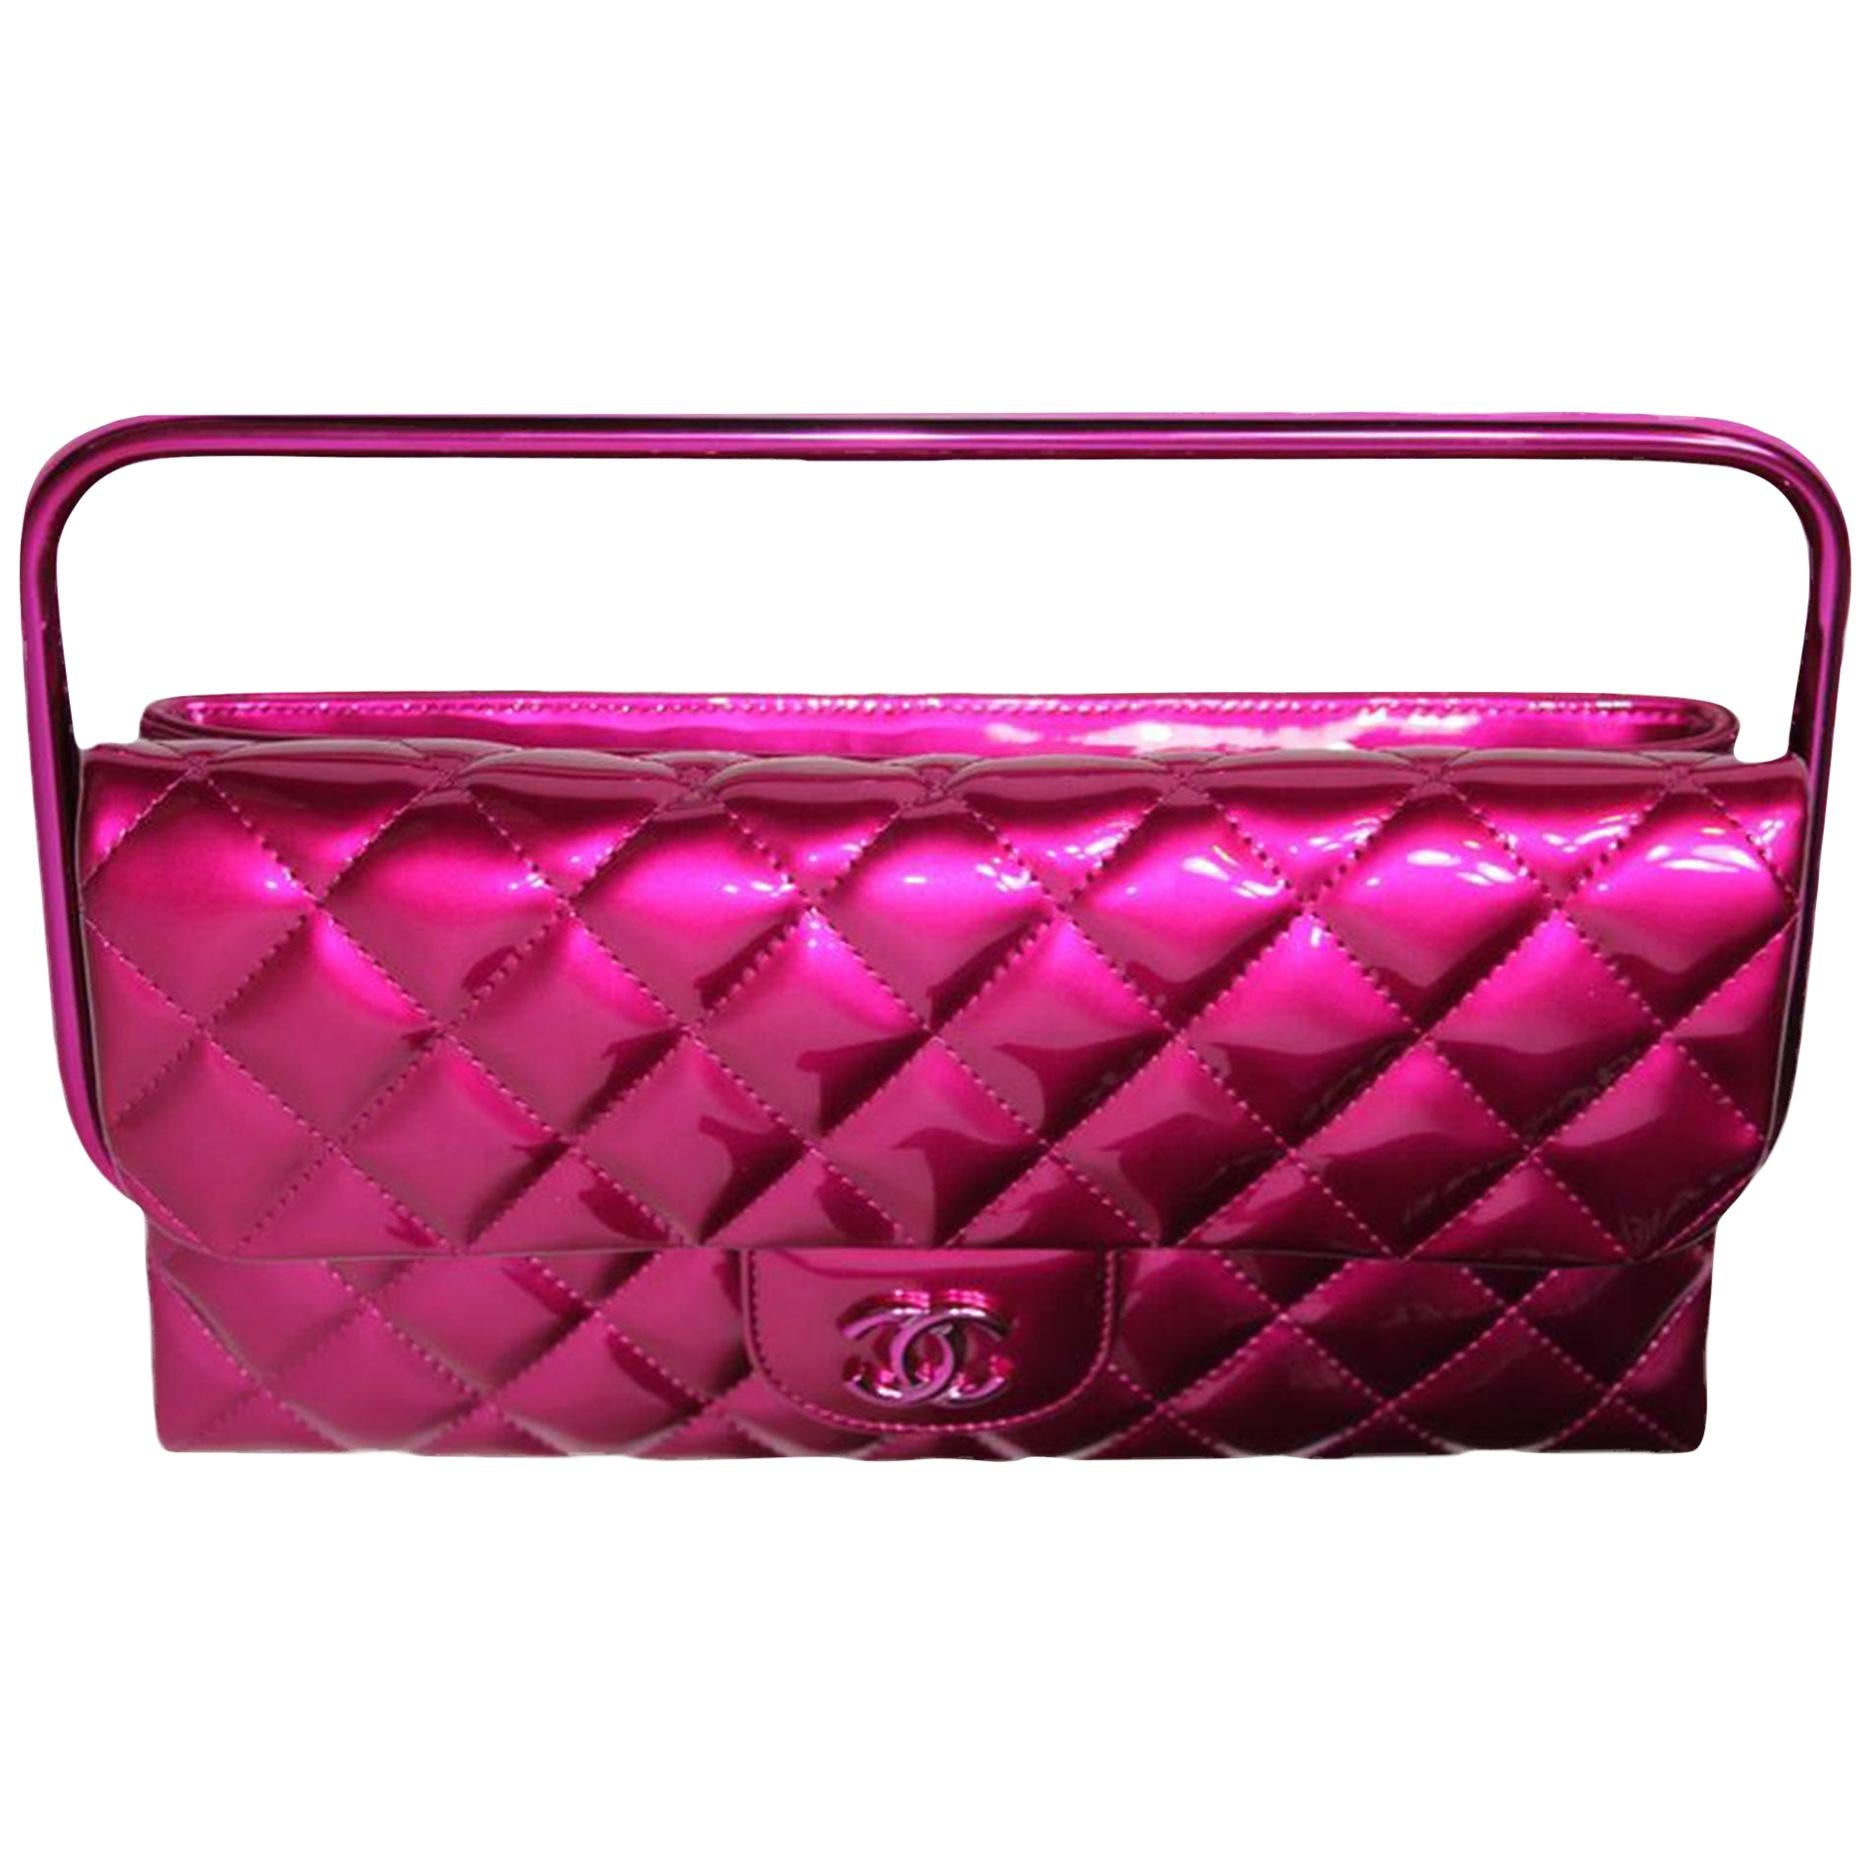 Electric pink fuschia quilted patent leather clutch with rectangle metal frame

Year: 2014
Metallic cc logo
Satin interior lining
Zippered back pocket
10.5